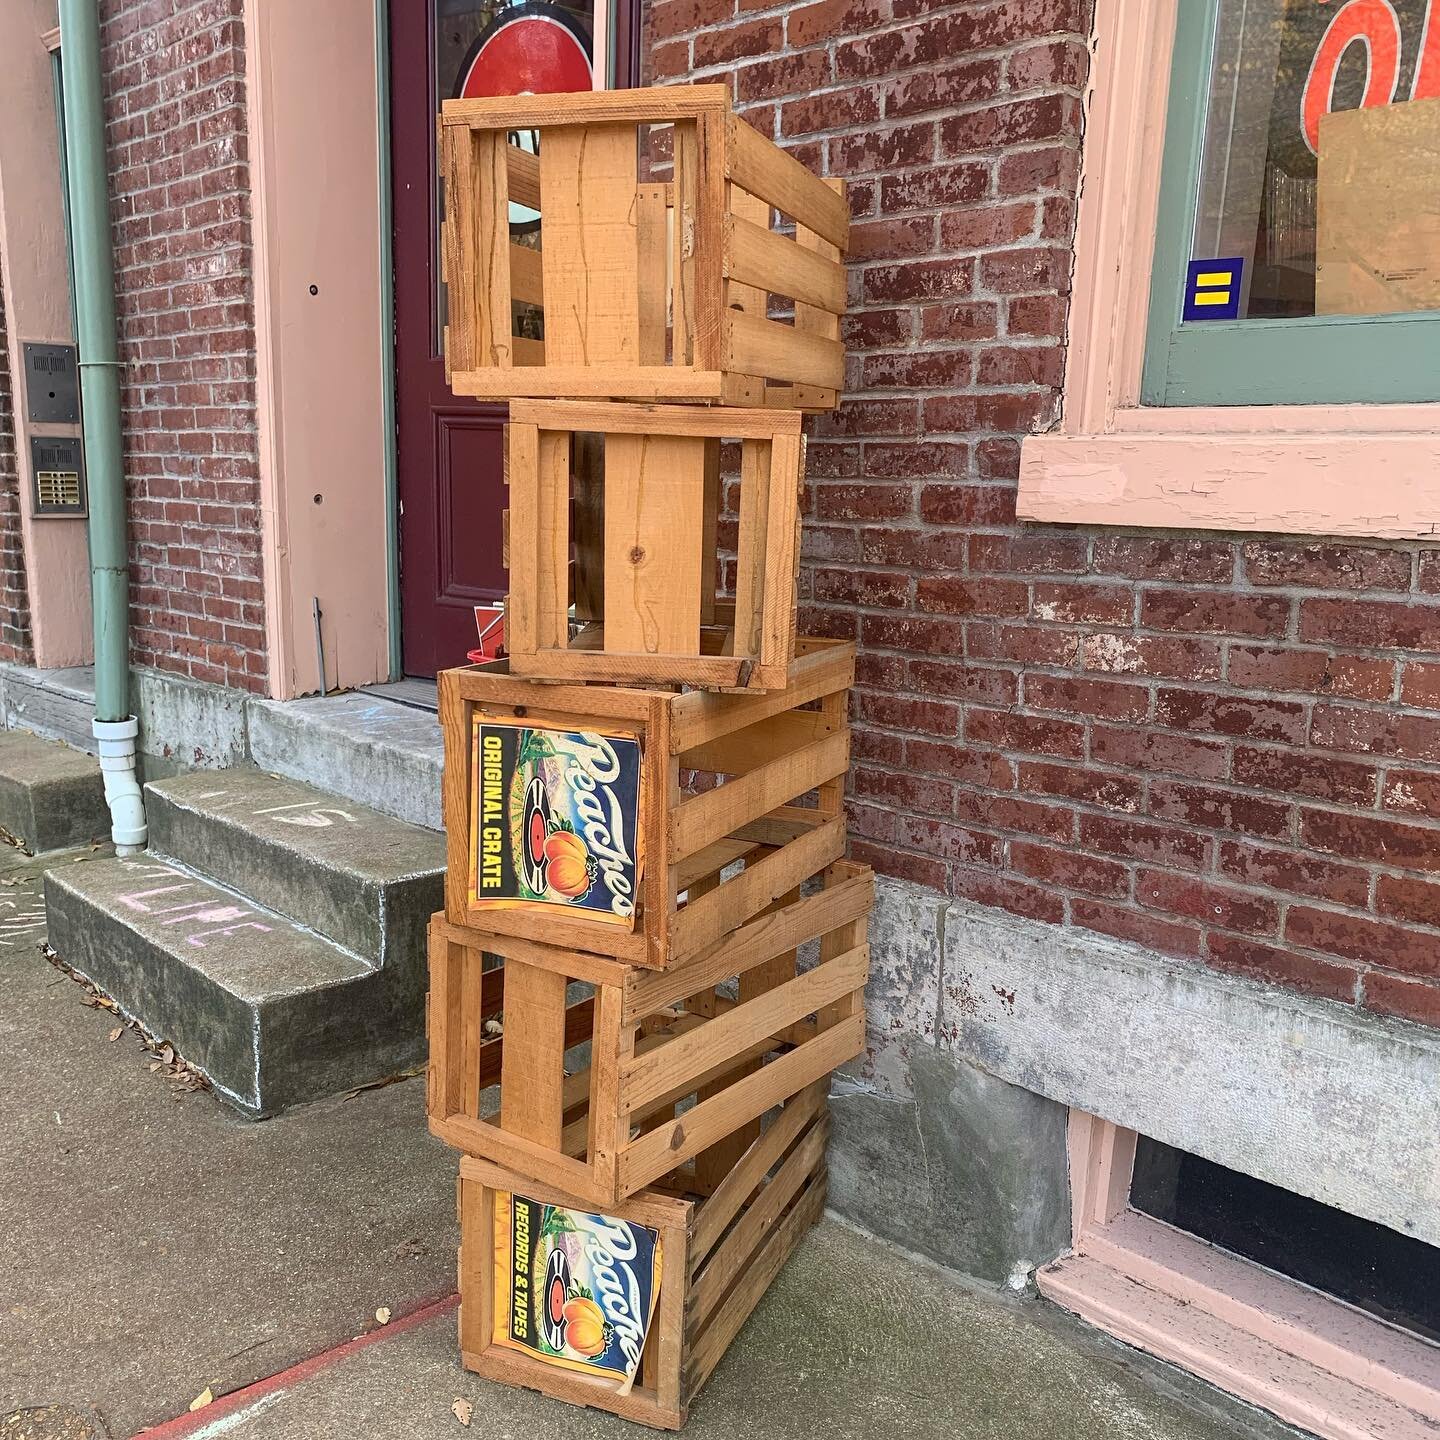 Got some old Peaches crates out at the shop today! $15 each or the whole lot for $50. Come by and take a look or DM us if you&rsquo;re interested!

#newarrivals #igvinylclub #igvinylcommunity #shopsmall #cherokeestreet #cherokeestreetstl